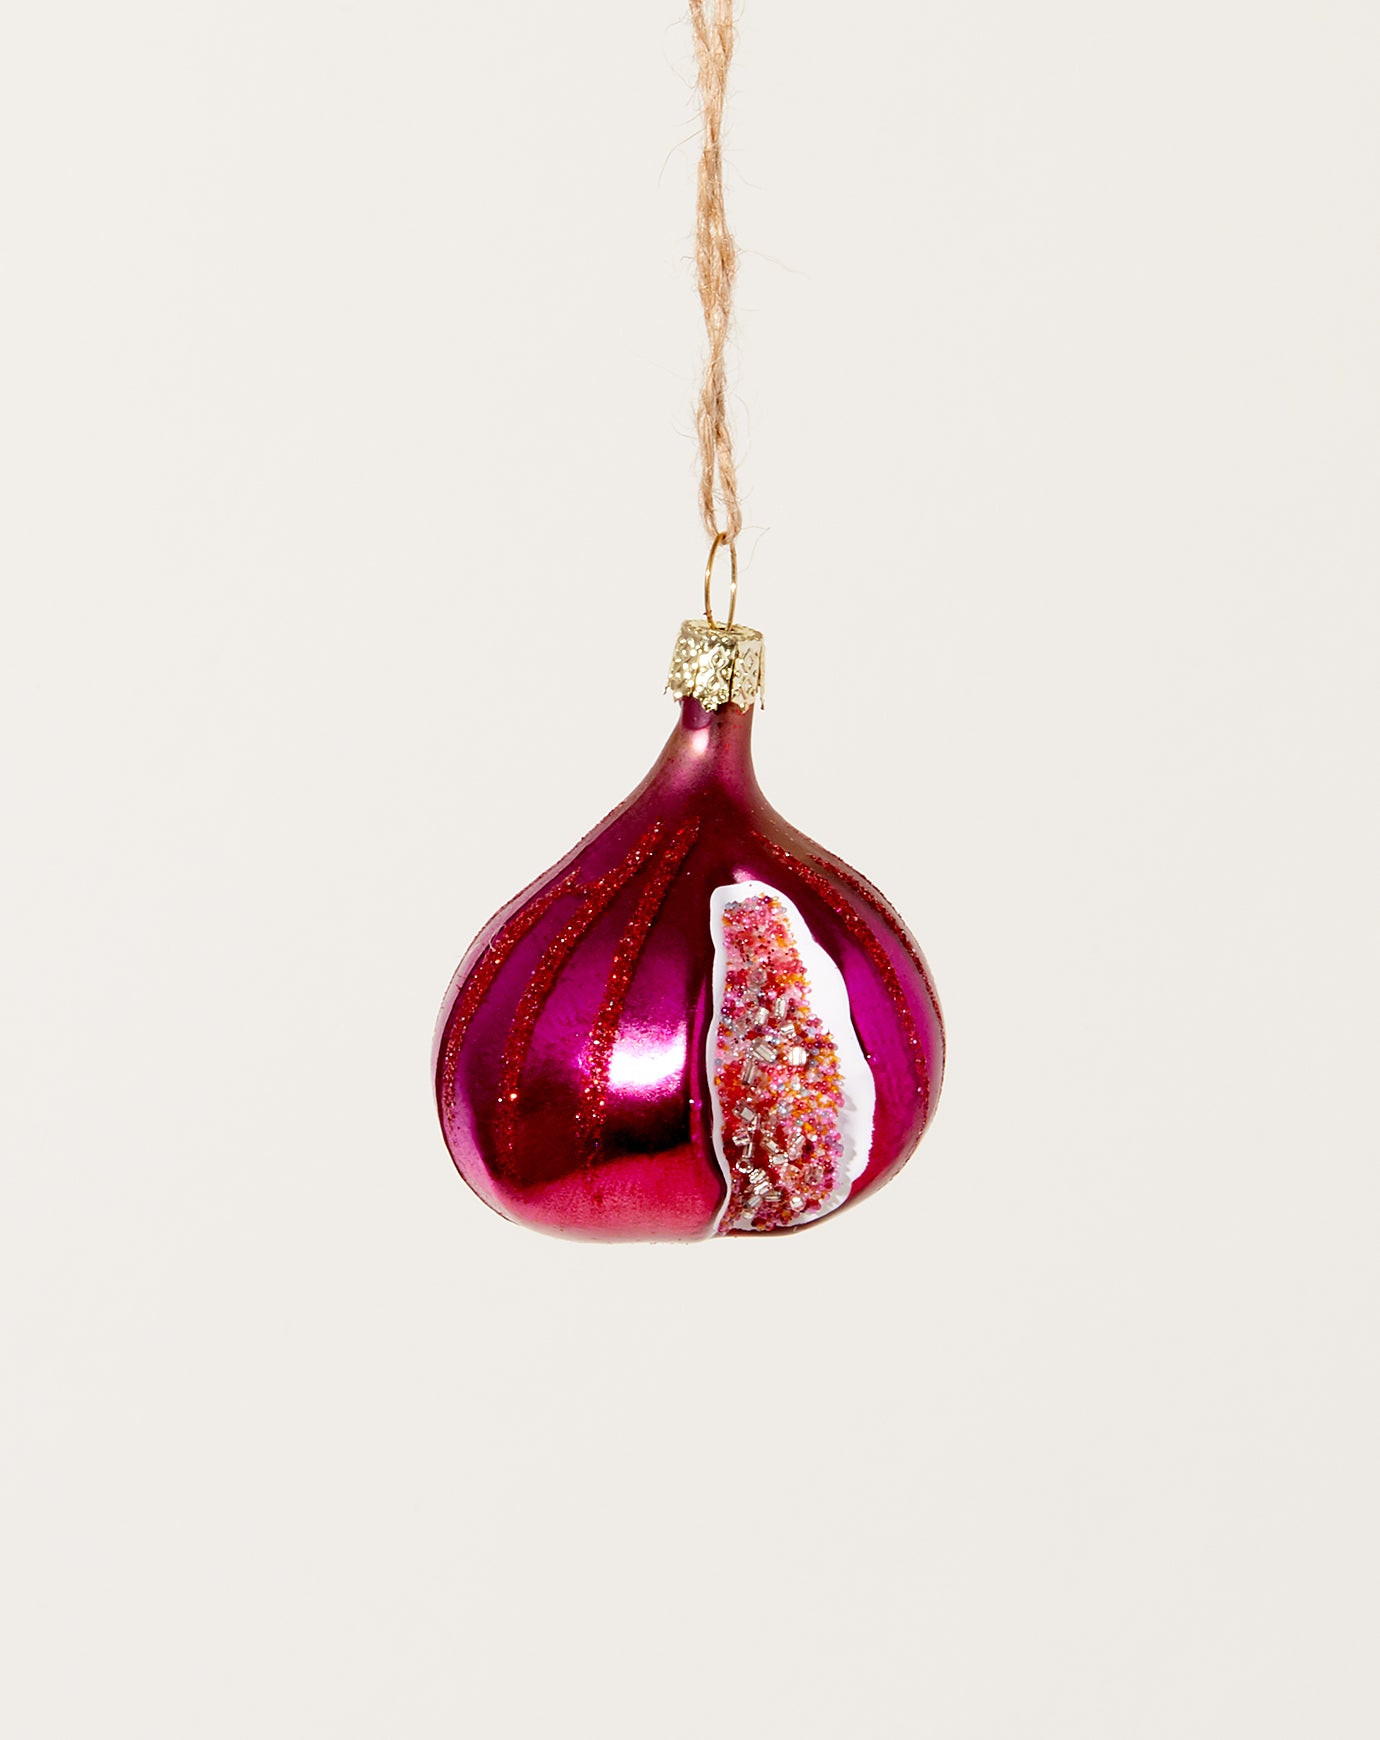 Orchard Fig Ornament in Purple